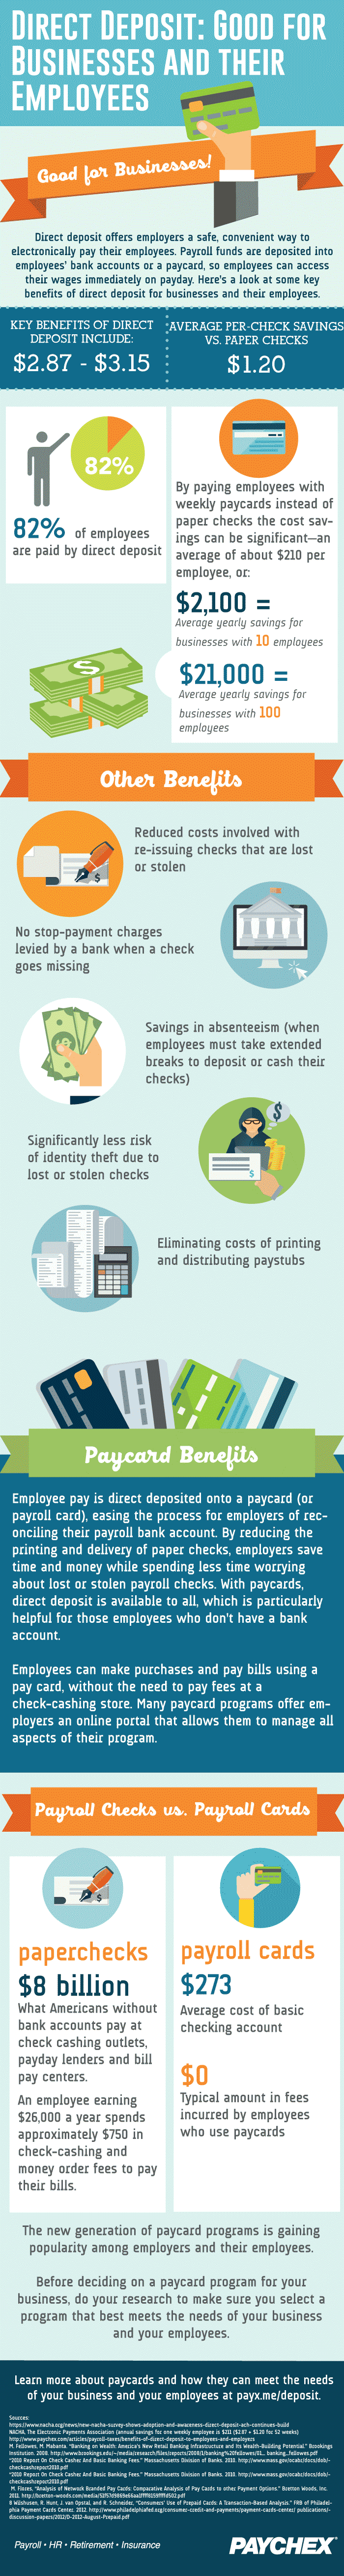 an infographic about direct deposit: good for businesses and their employees